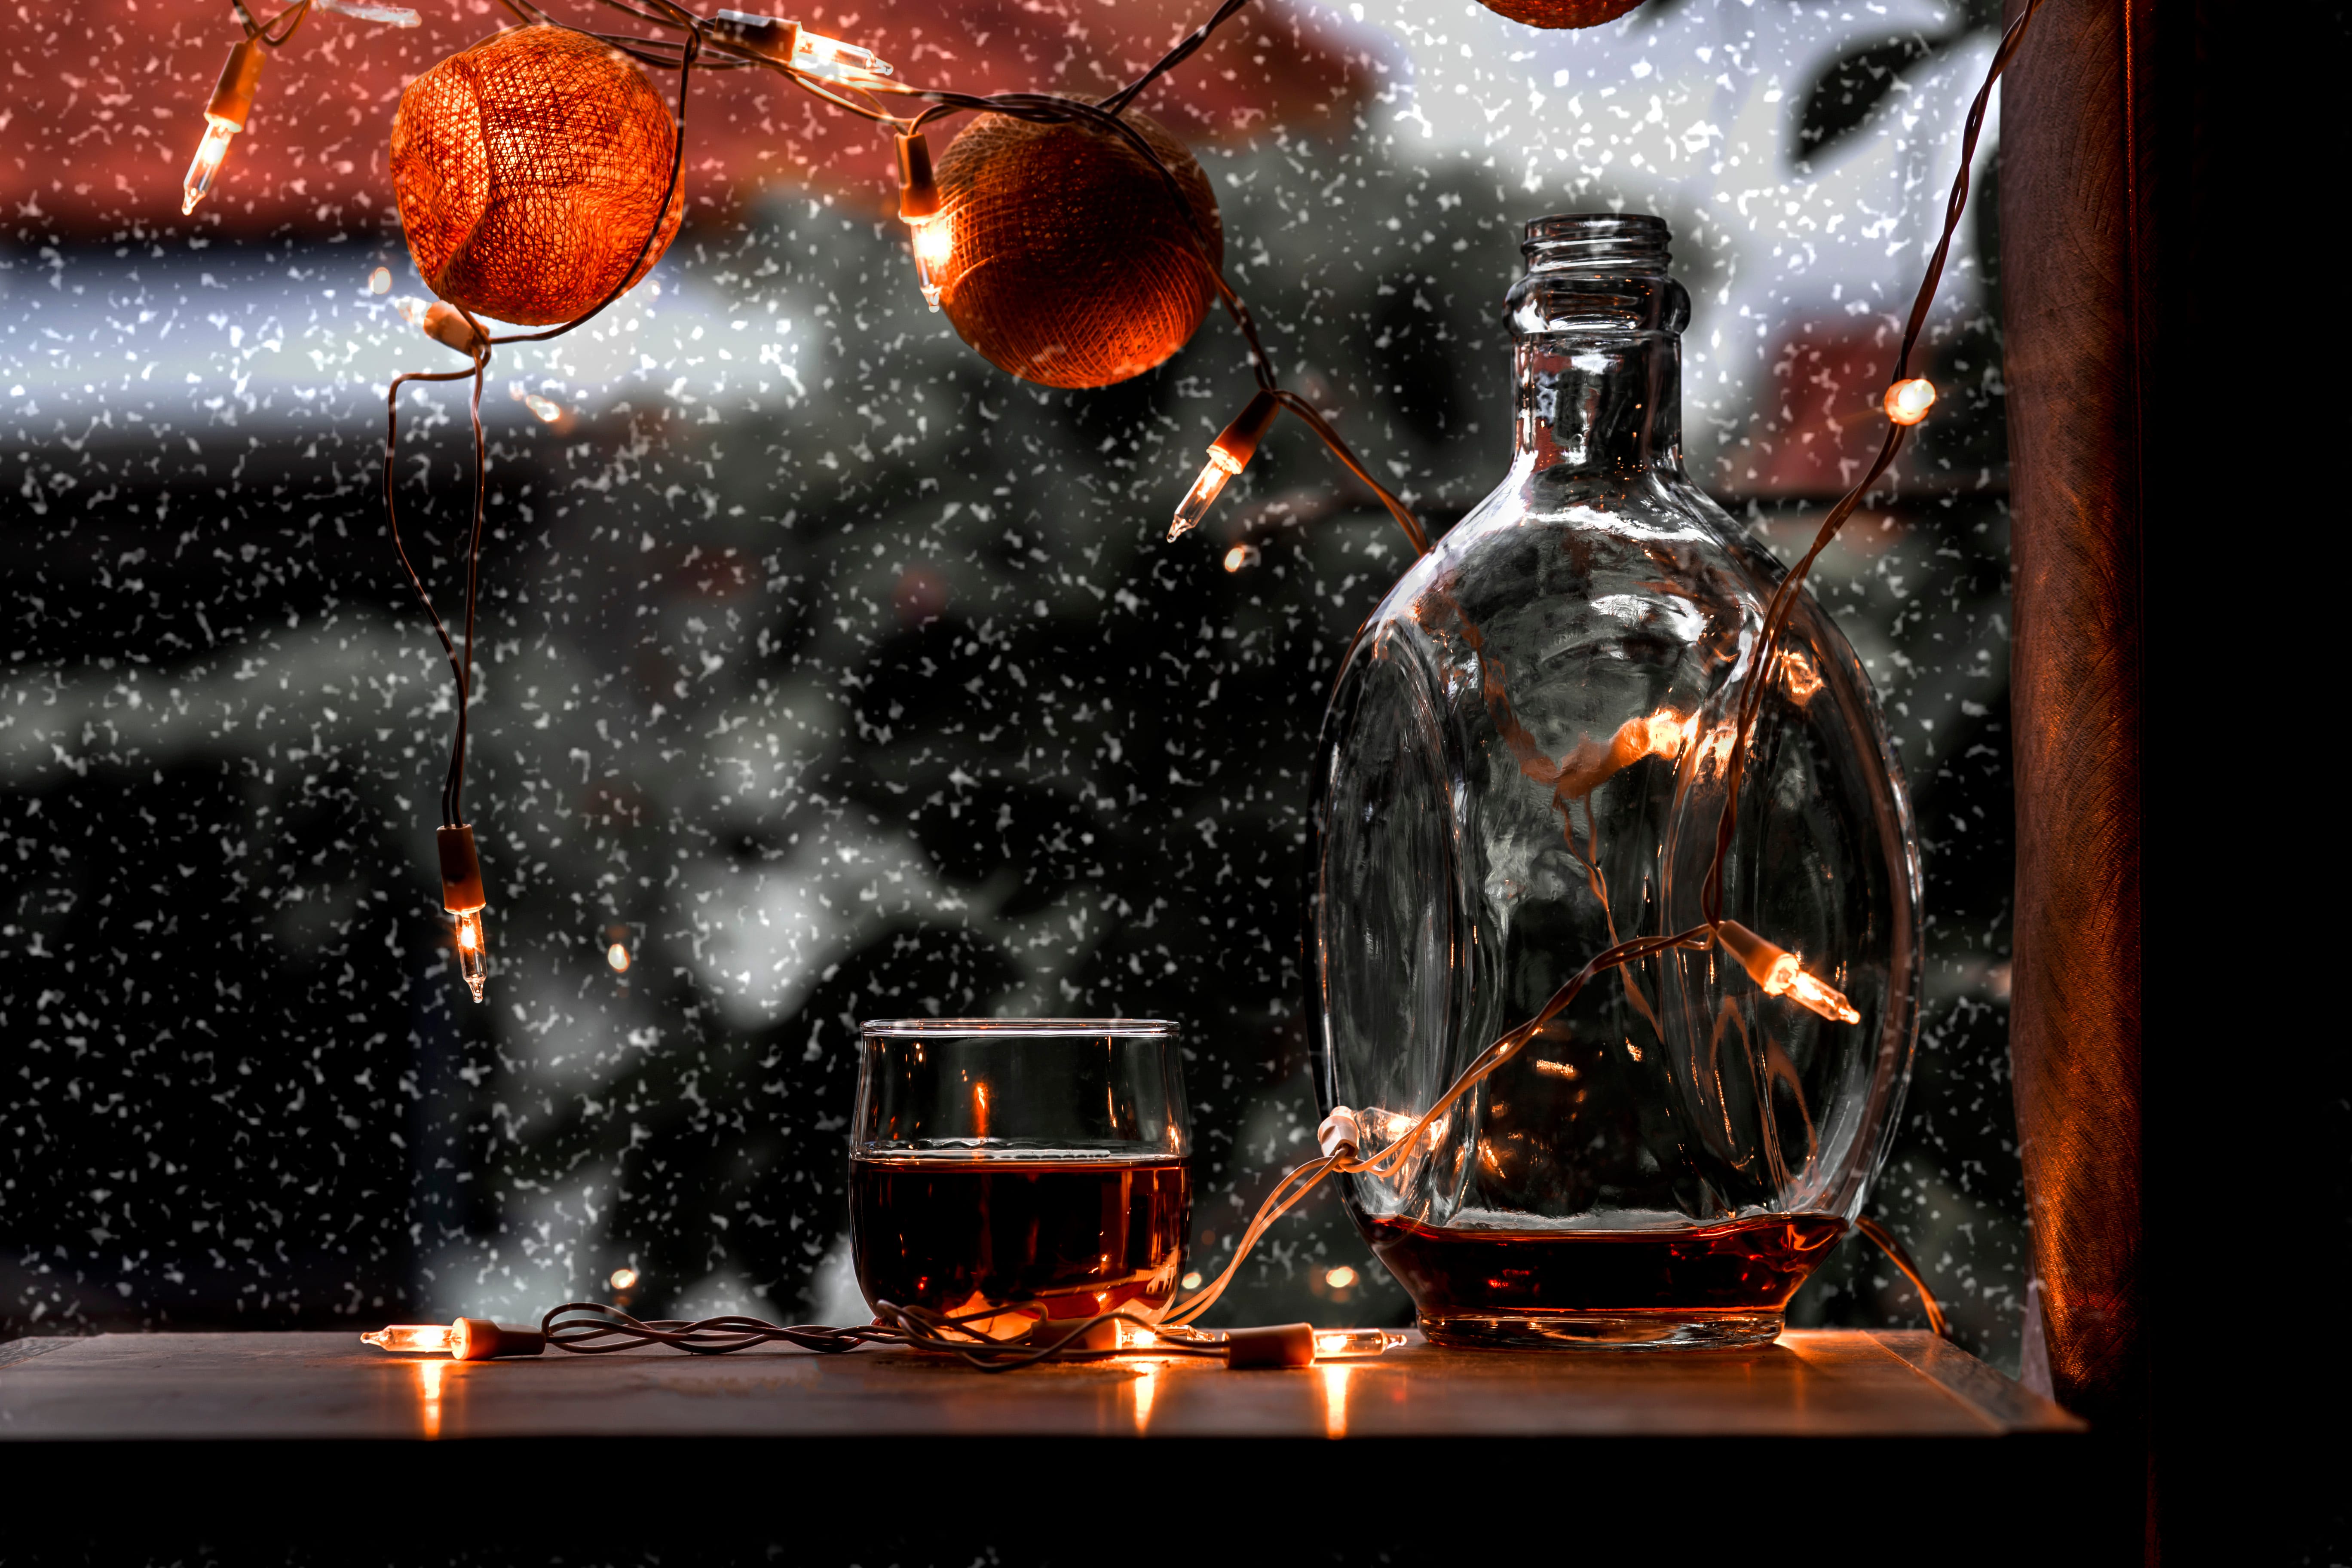 Top 10 Best Whisky Gift Ideas Under £50 for Christmas 2020 in the UK